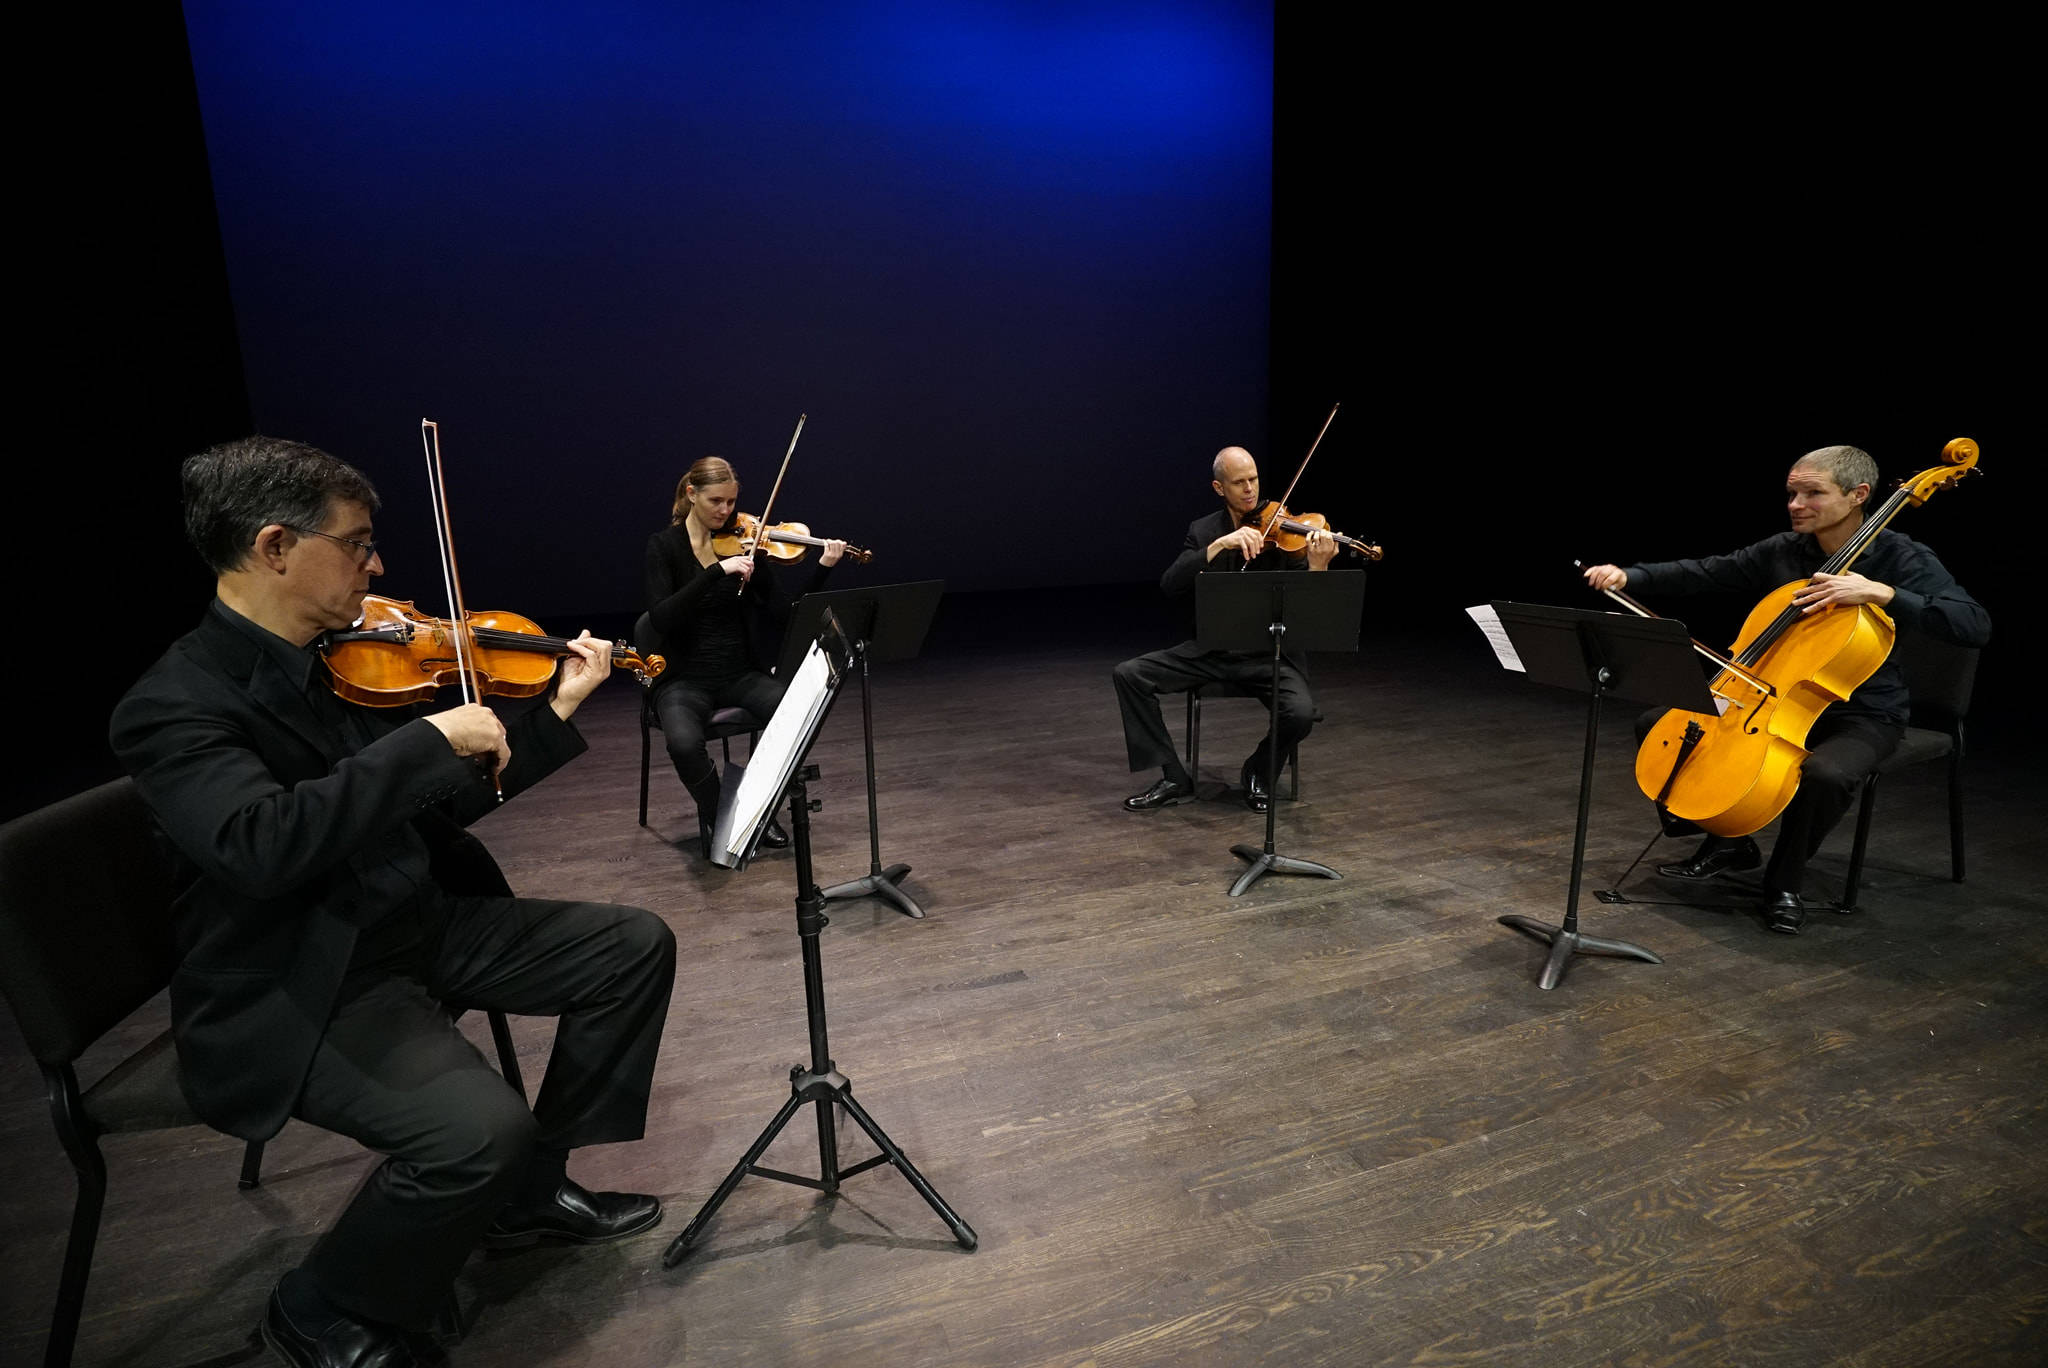 The Sycamore String Quartet’s performance in Lake Country has been postponed due to the latest COVID-19 restrictions. (Quartet photo)